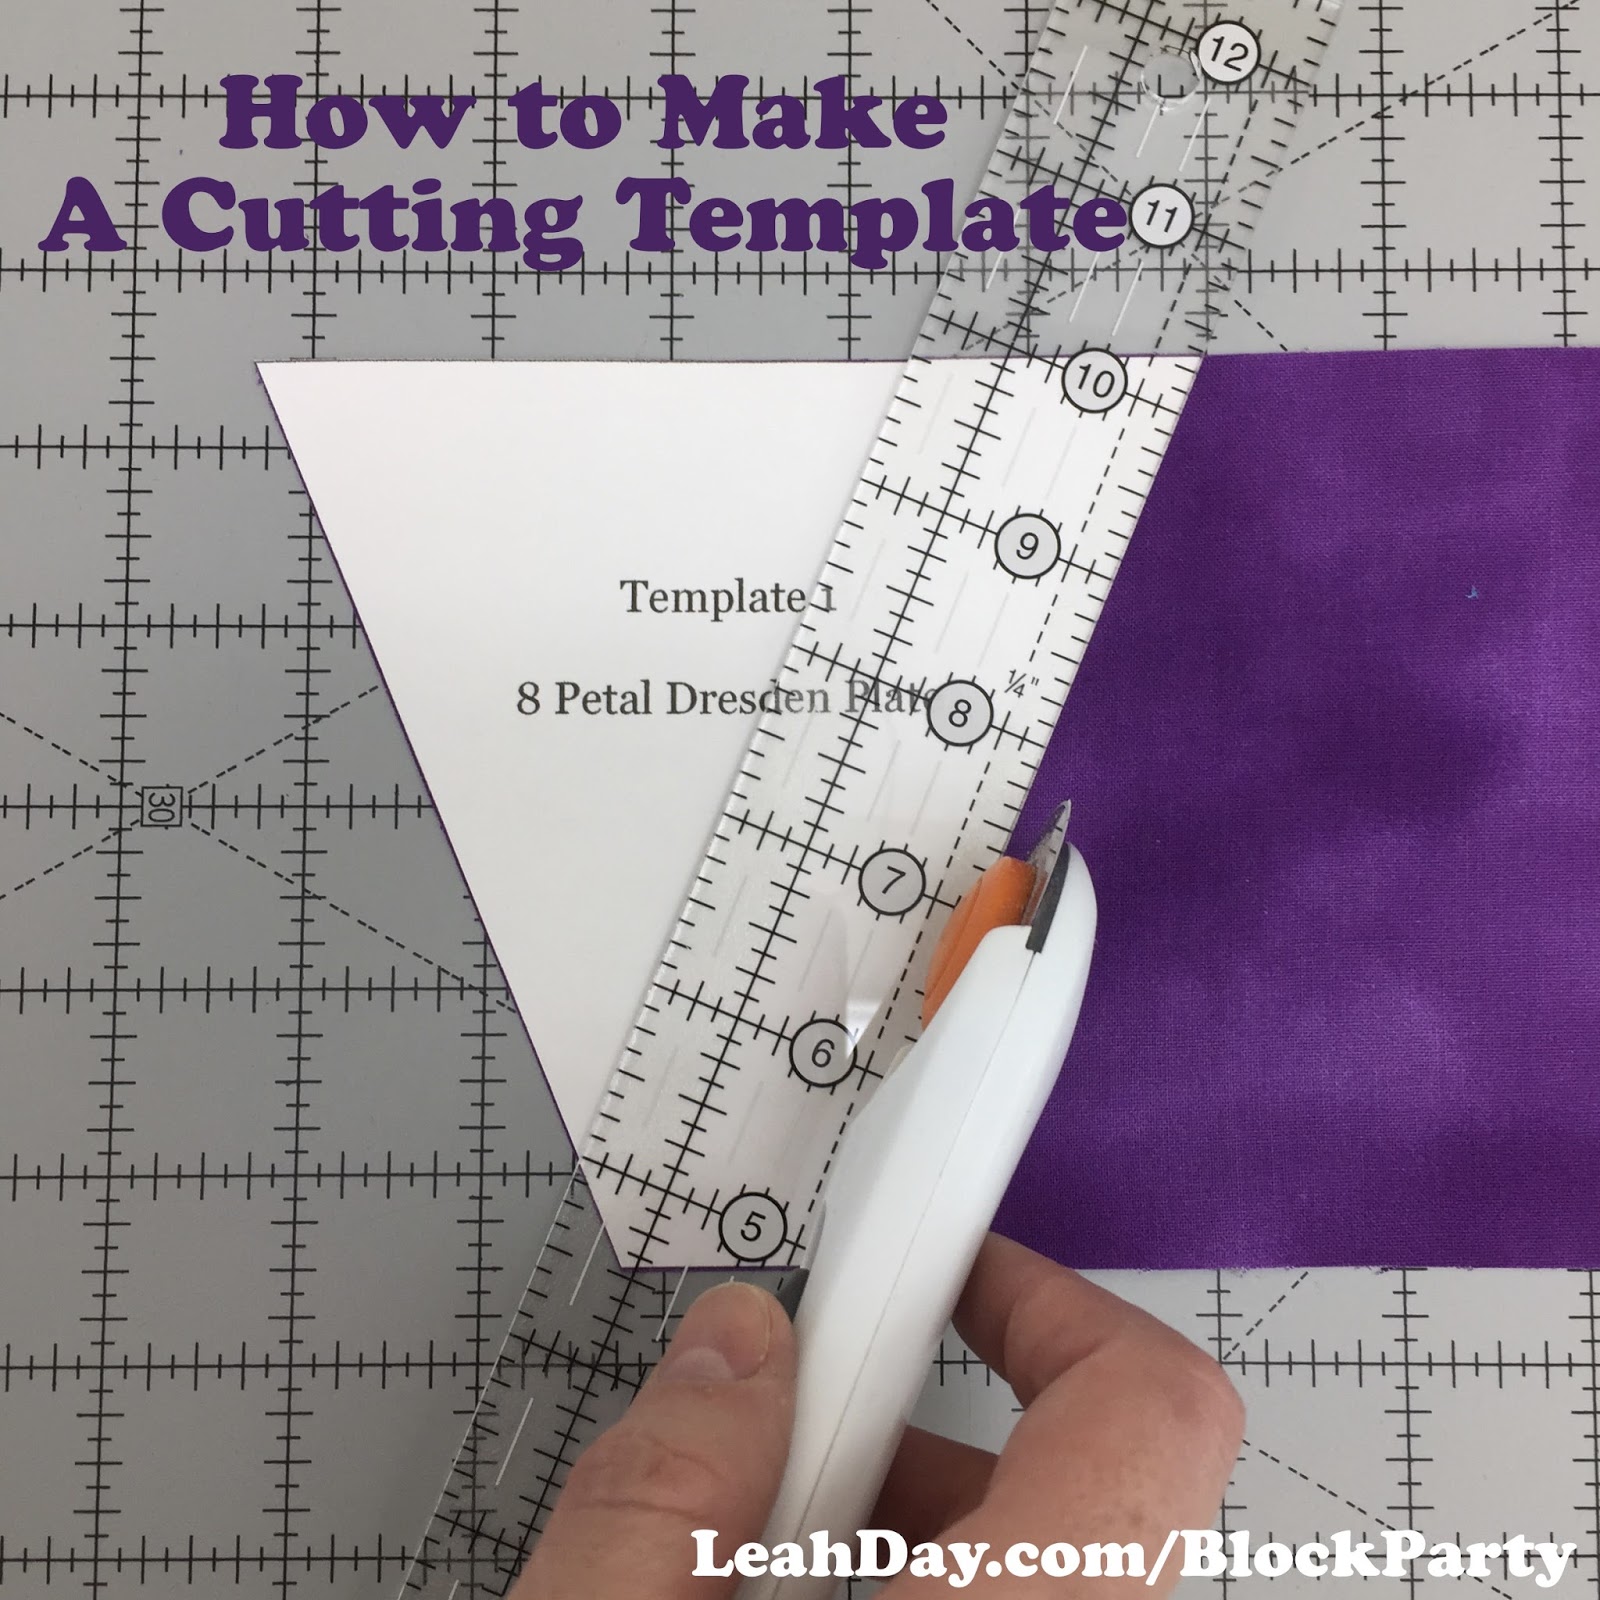 The Free Motion Quilting Project Quilting Basics 11 Create a Cutting